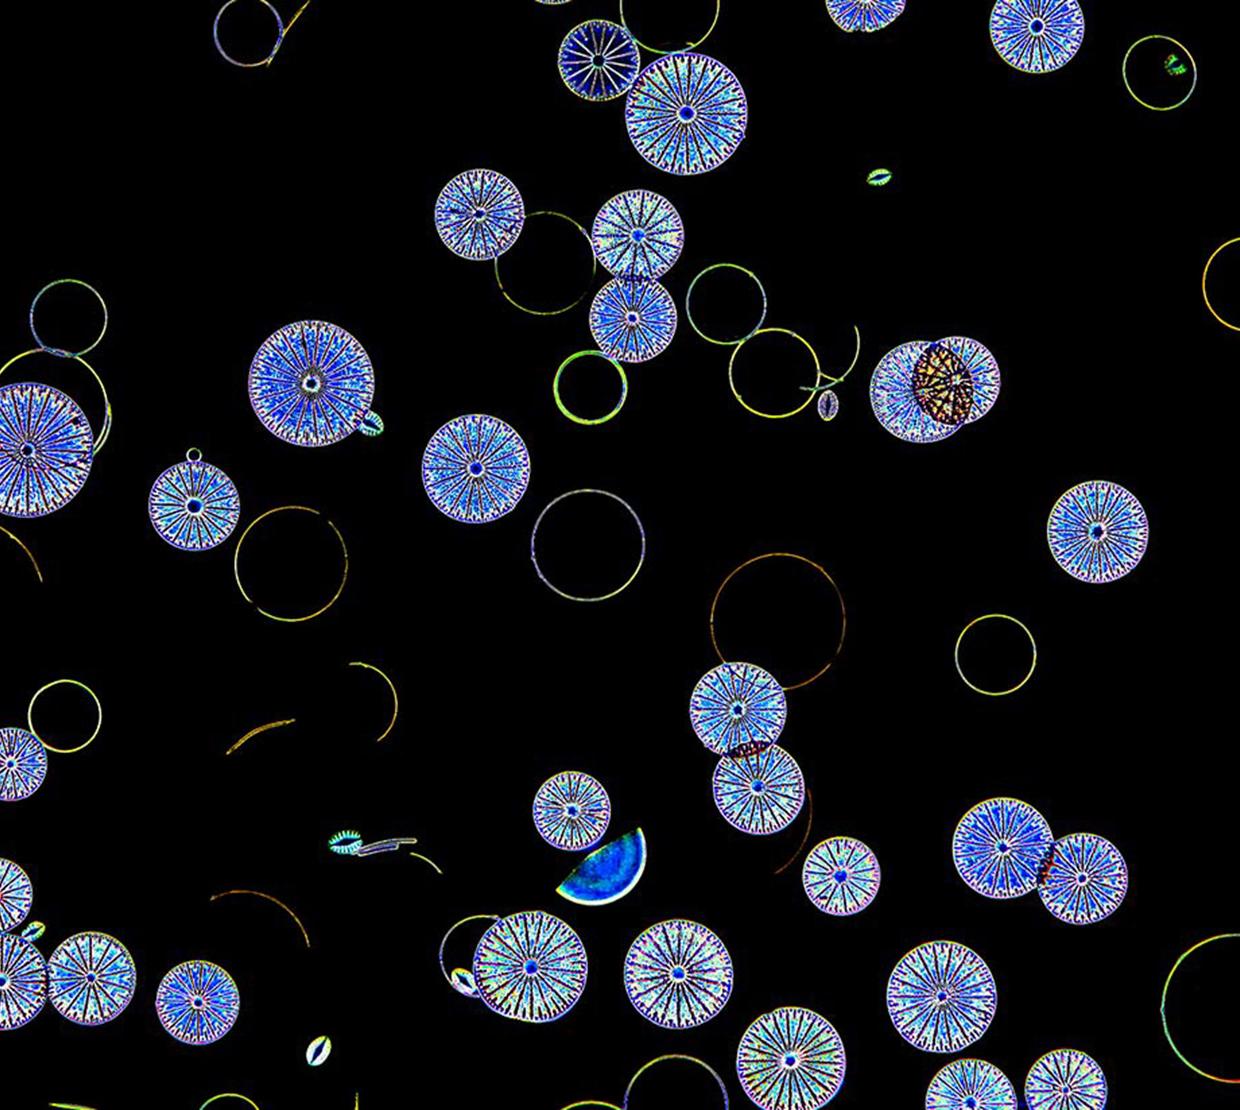 microscopic view of mating diatoms